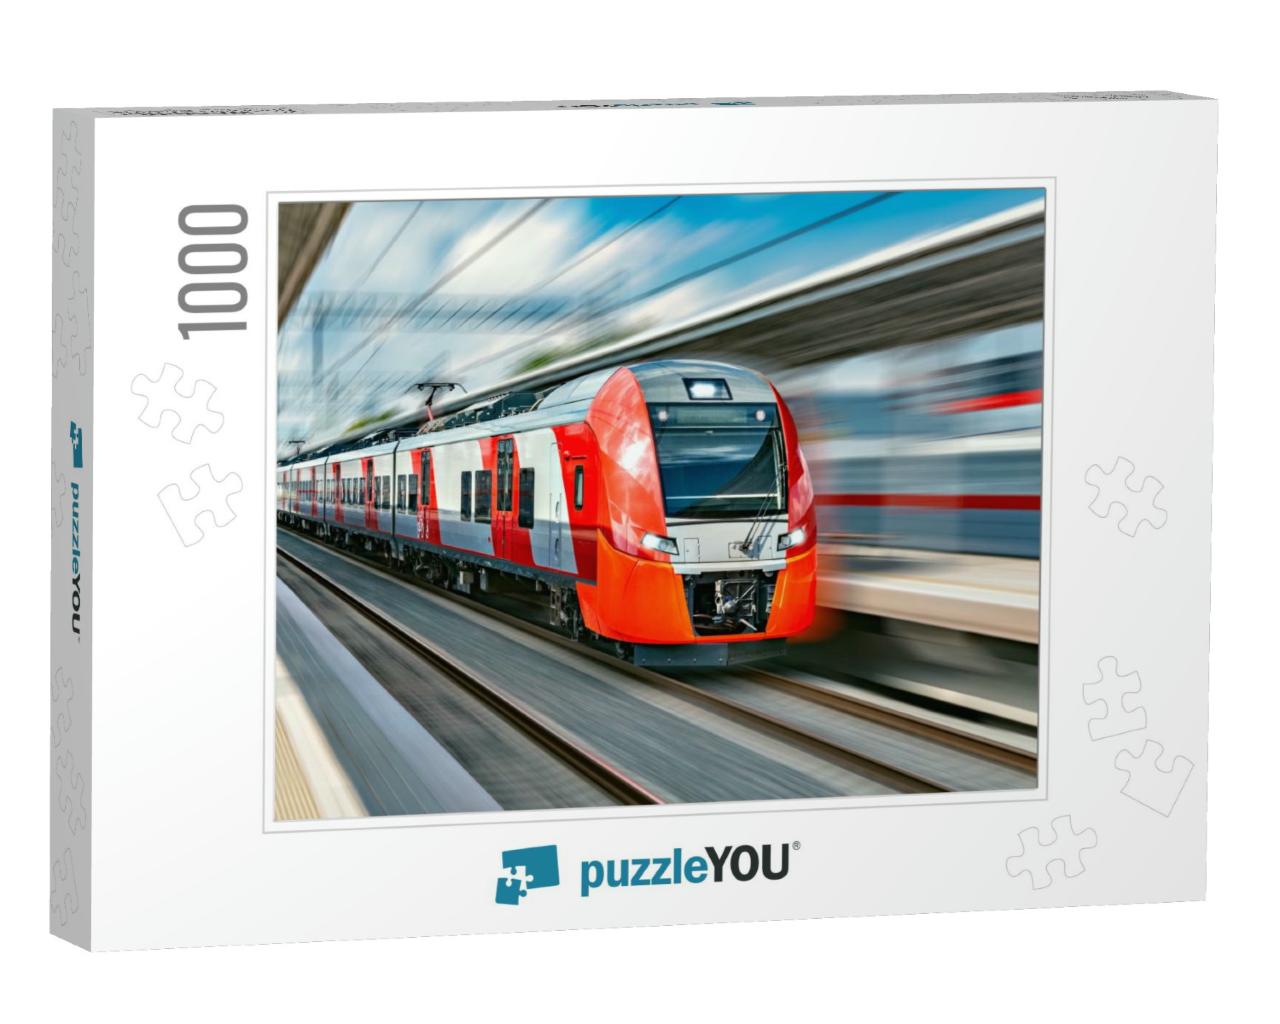 Modern High-Speed Train Moves Fast Along the Platform... Jigsaw Puzzle with 1000 pieces